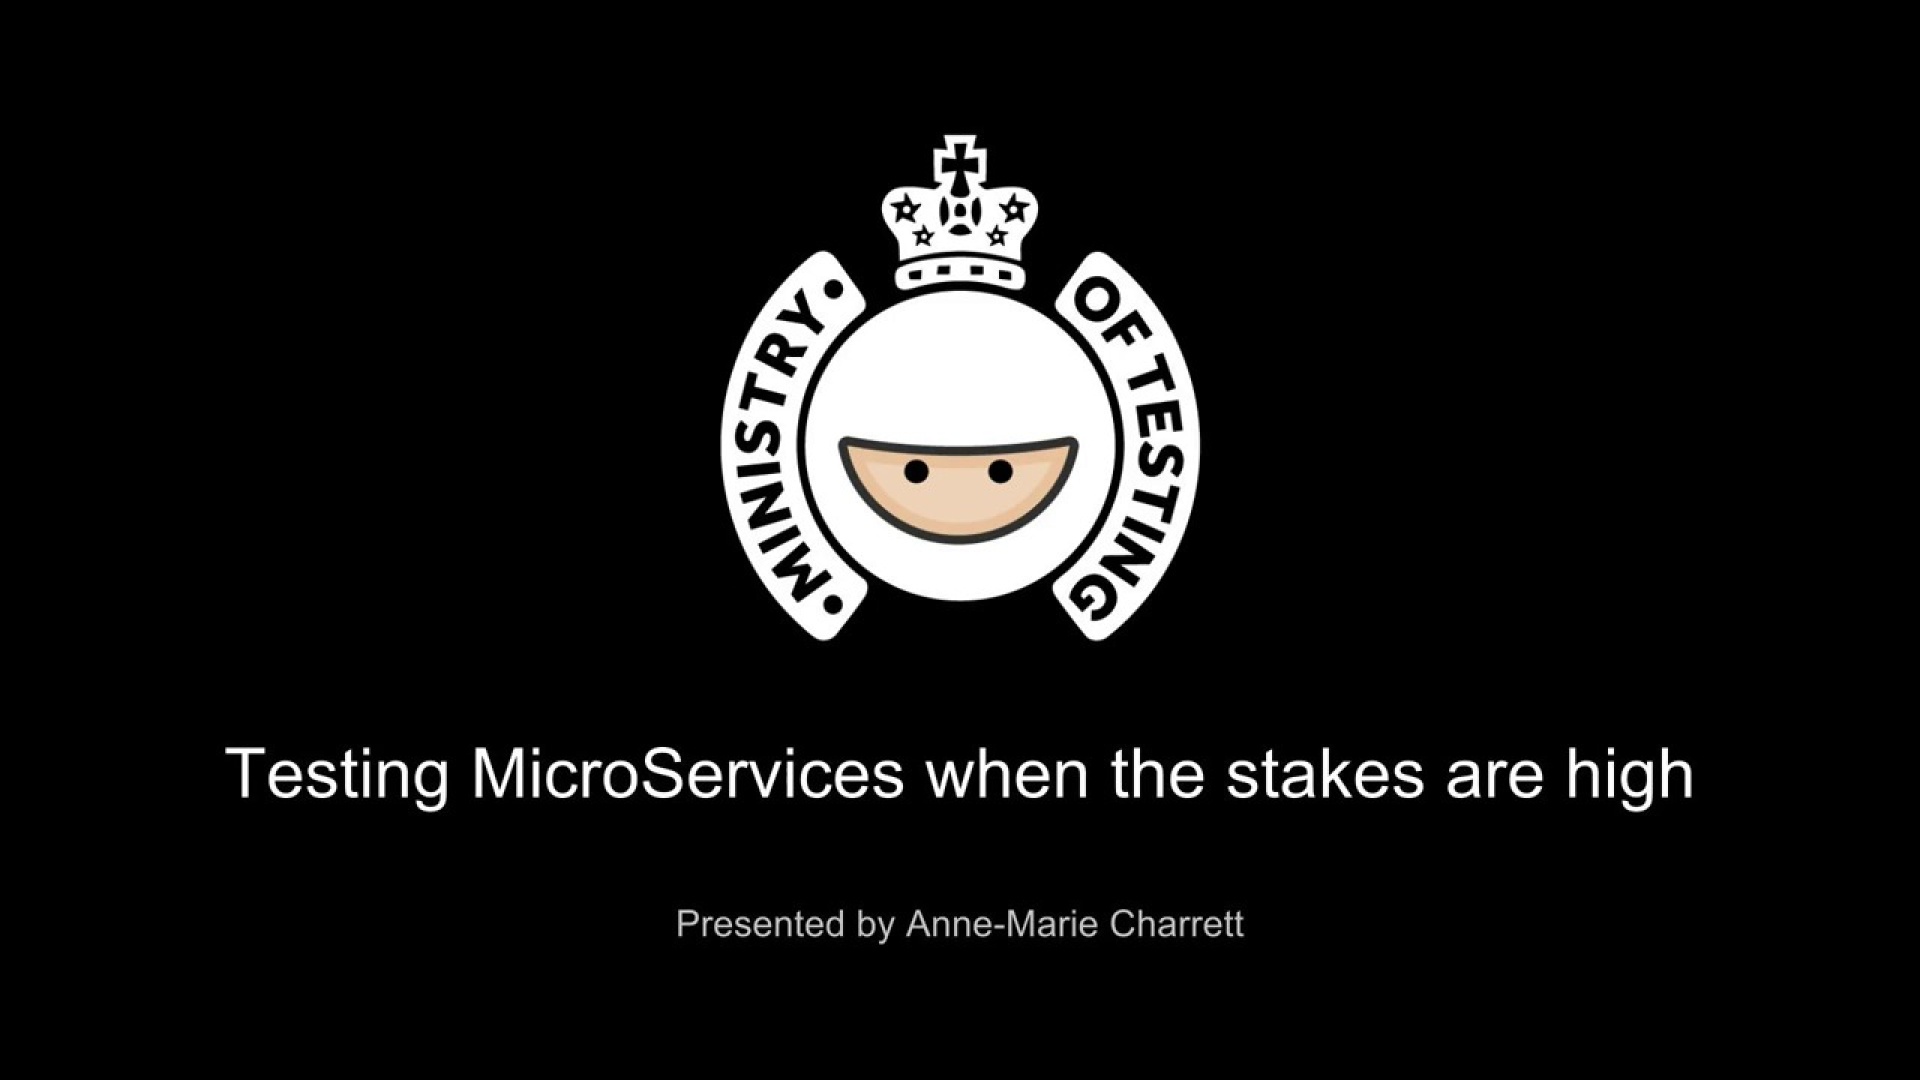 Testing Microservices When the Stakes Are High